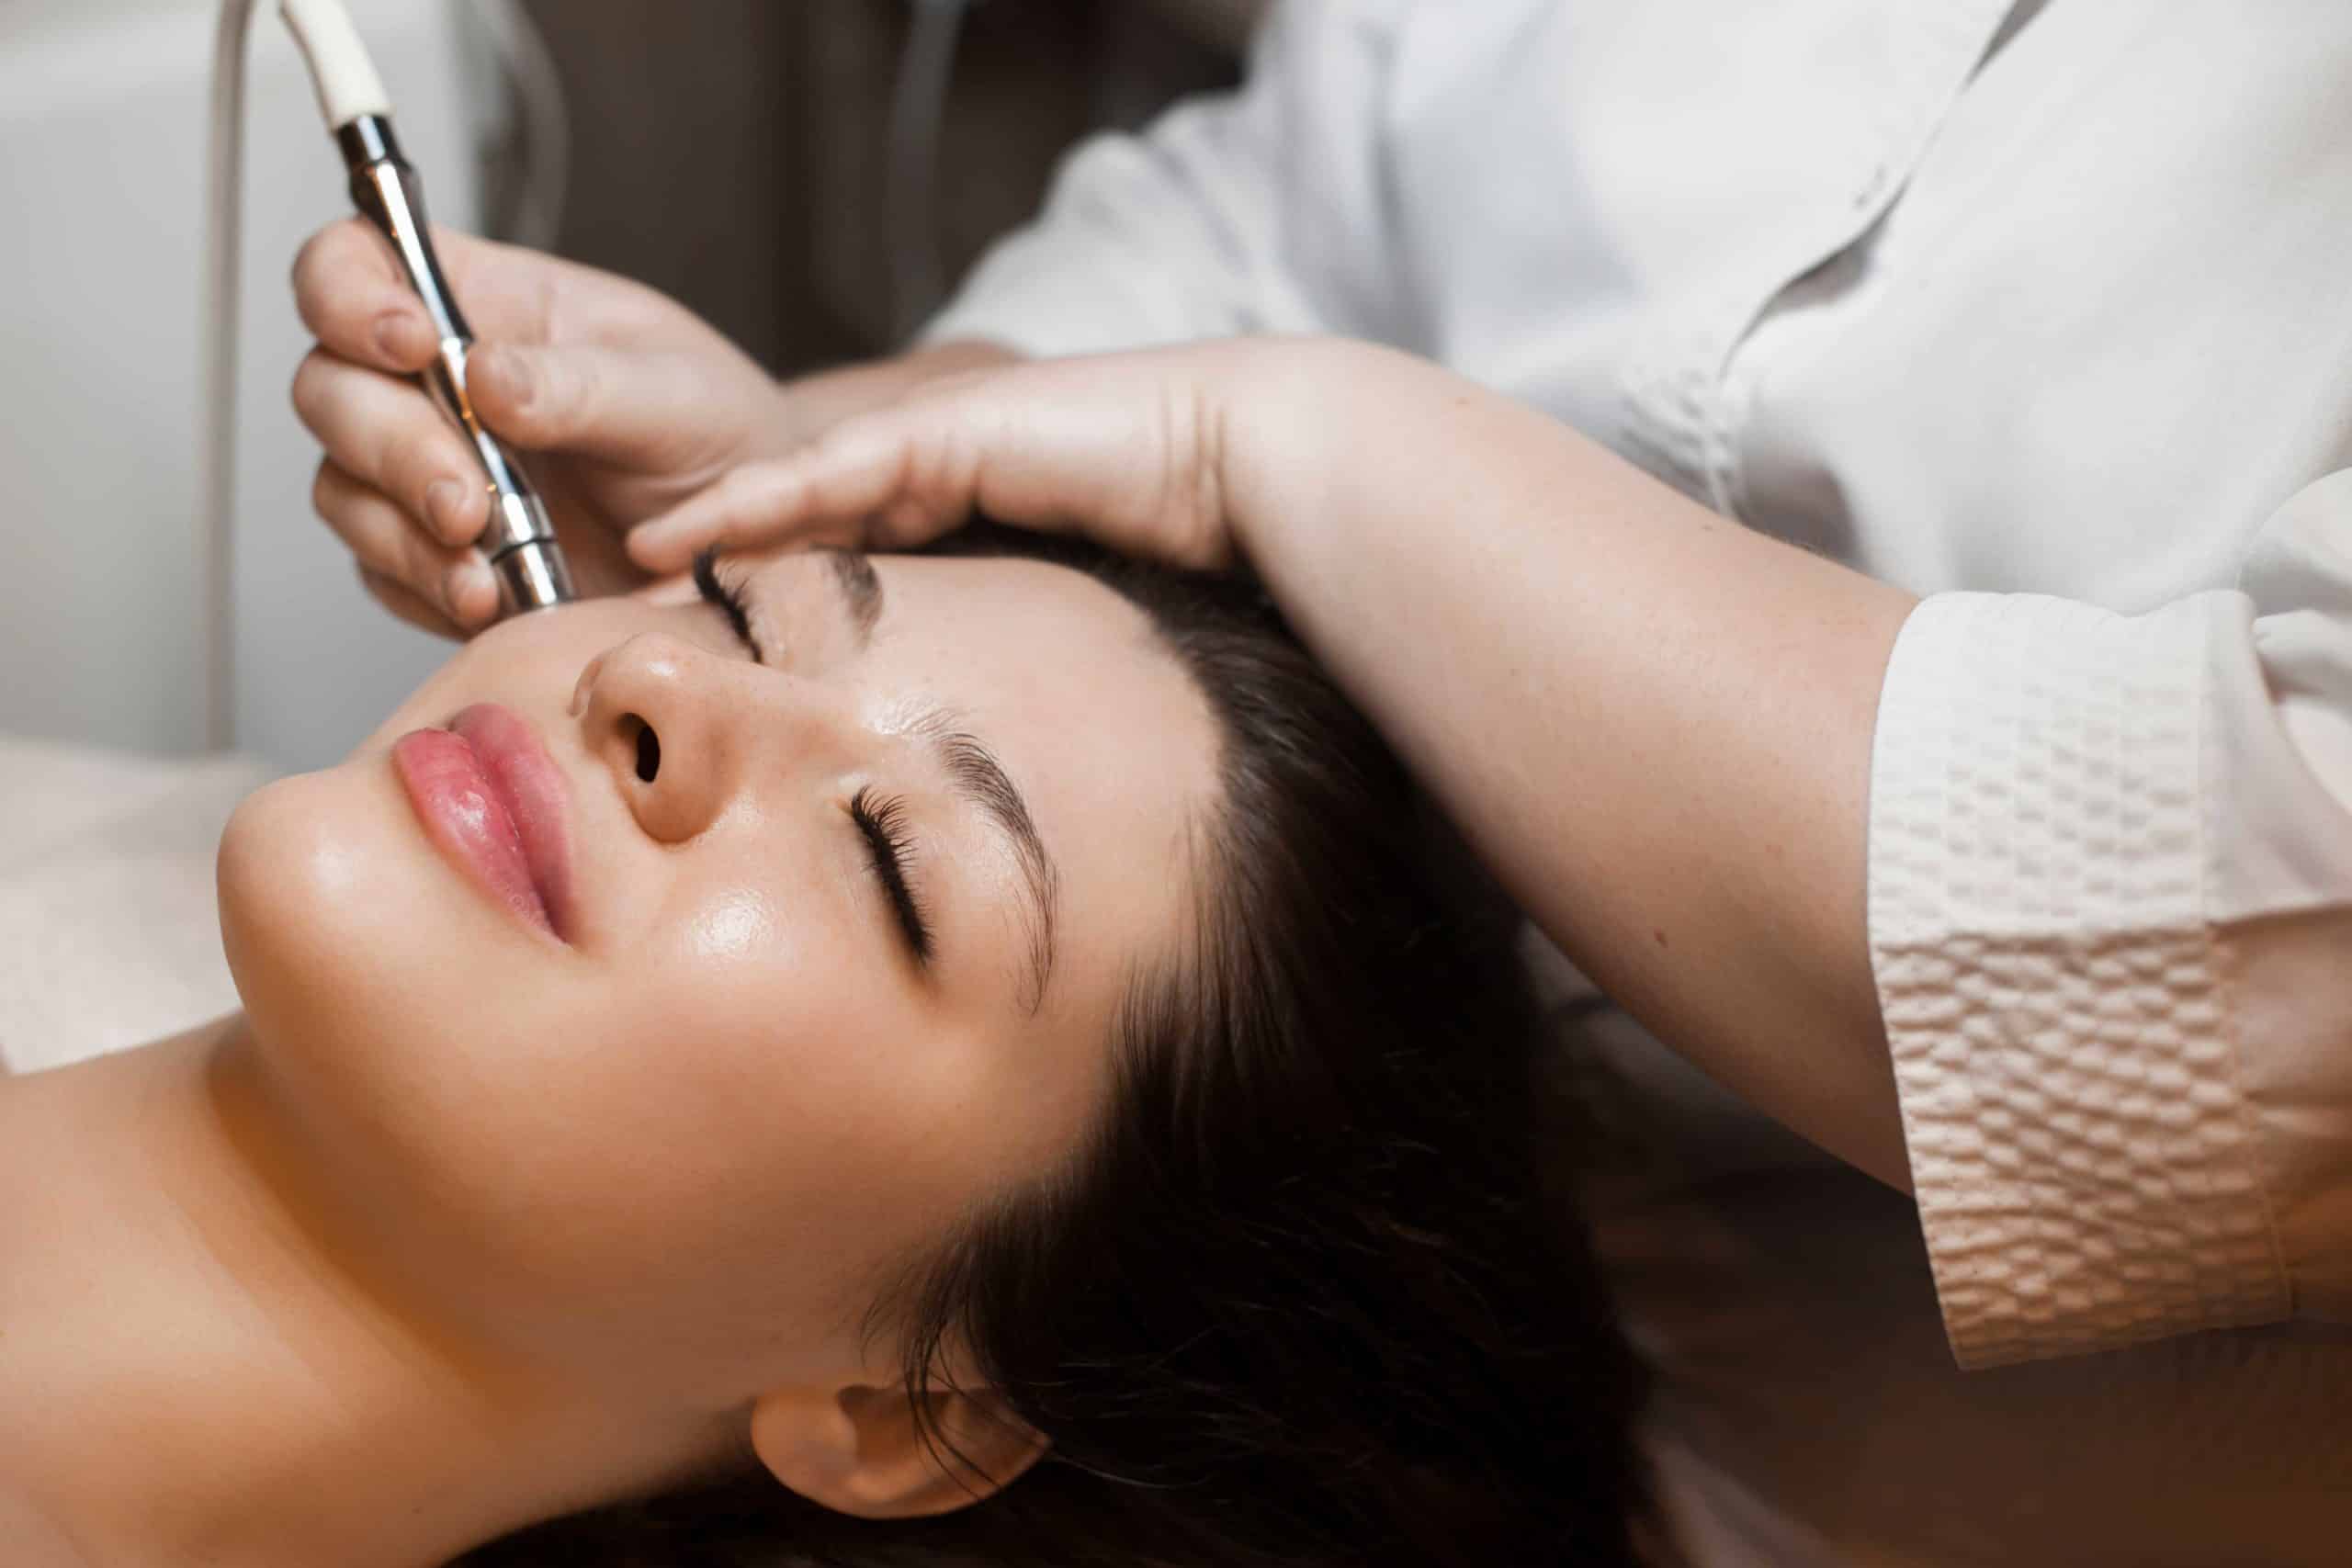 Young woman getting Microneedling Treatment | The Natural Aesthetic Medspa in Sykesville, MD